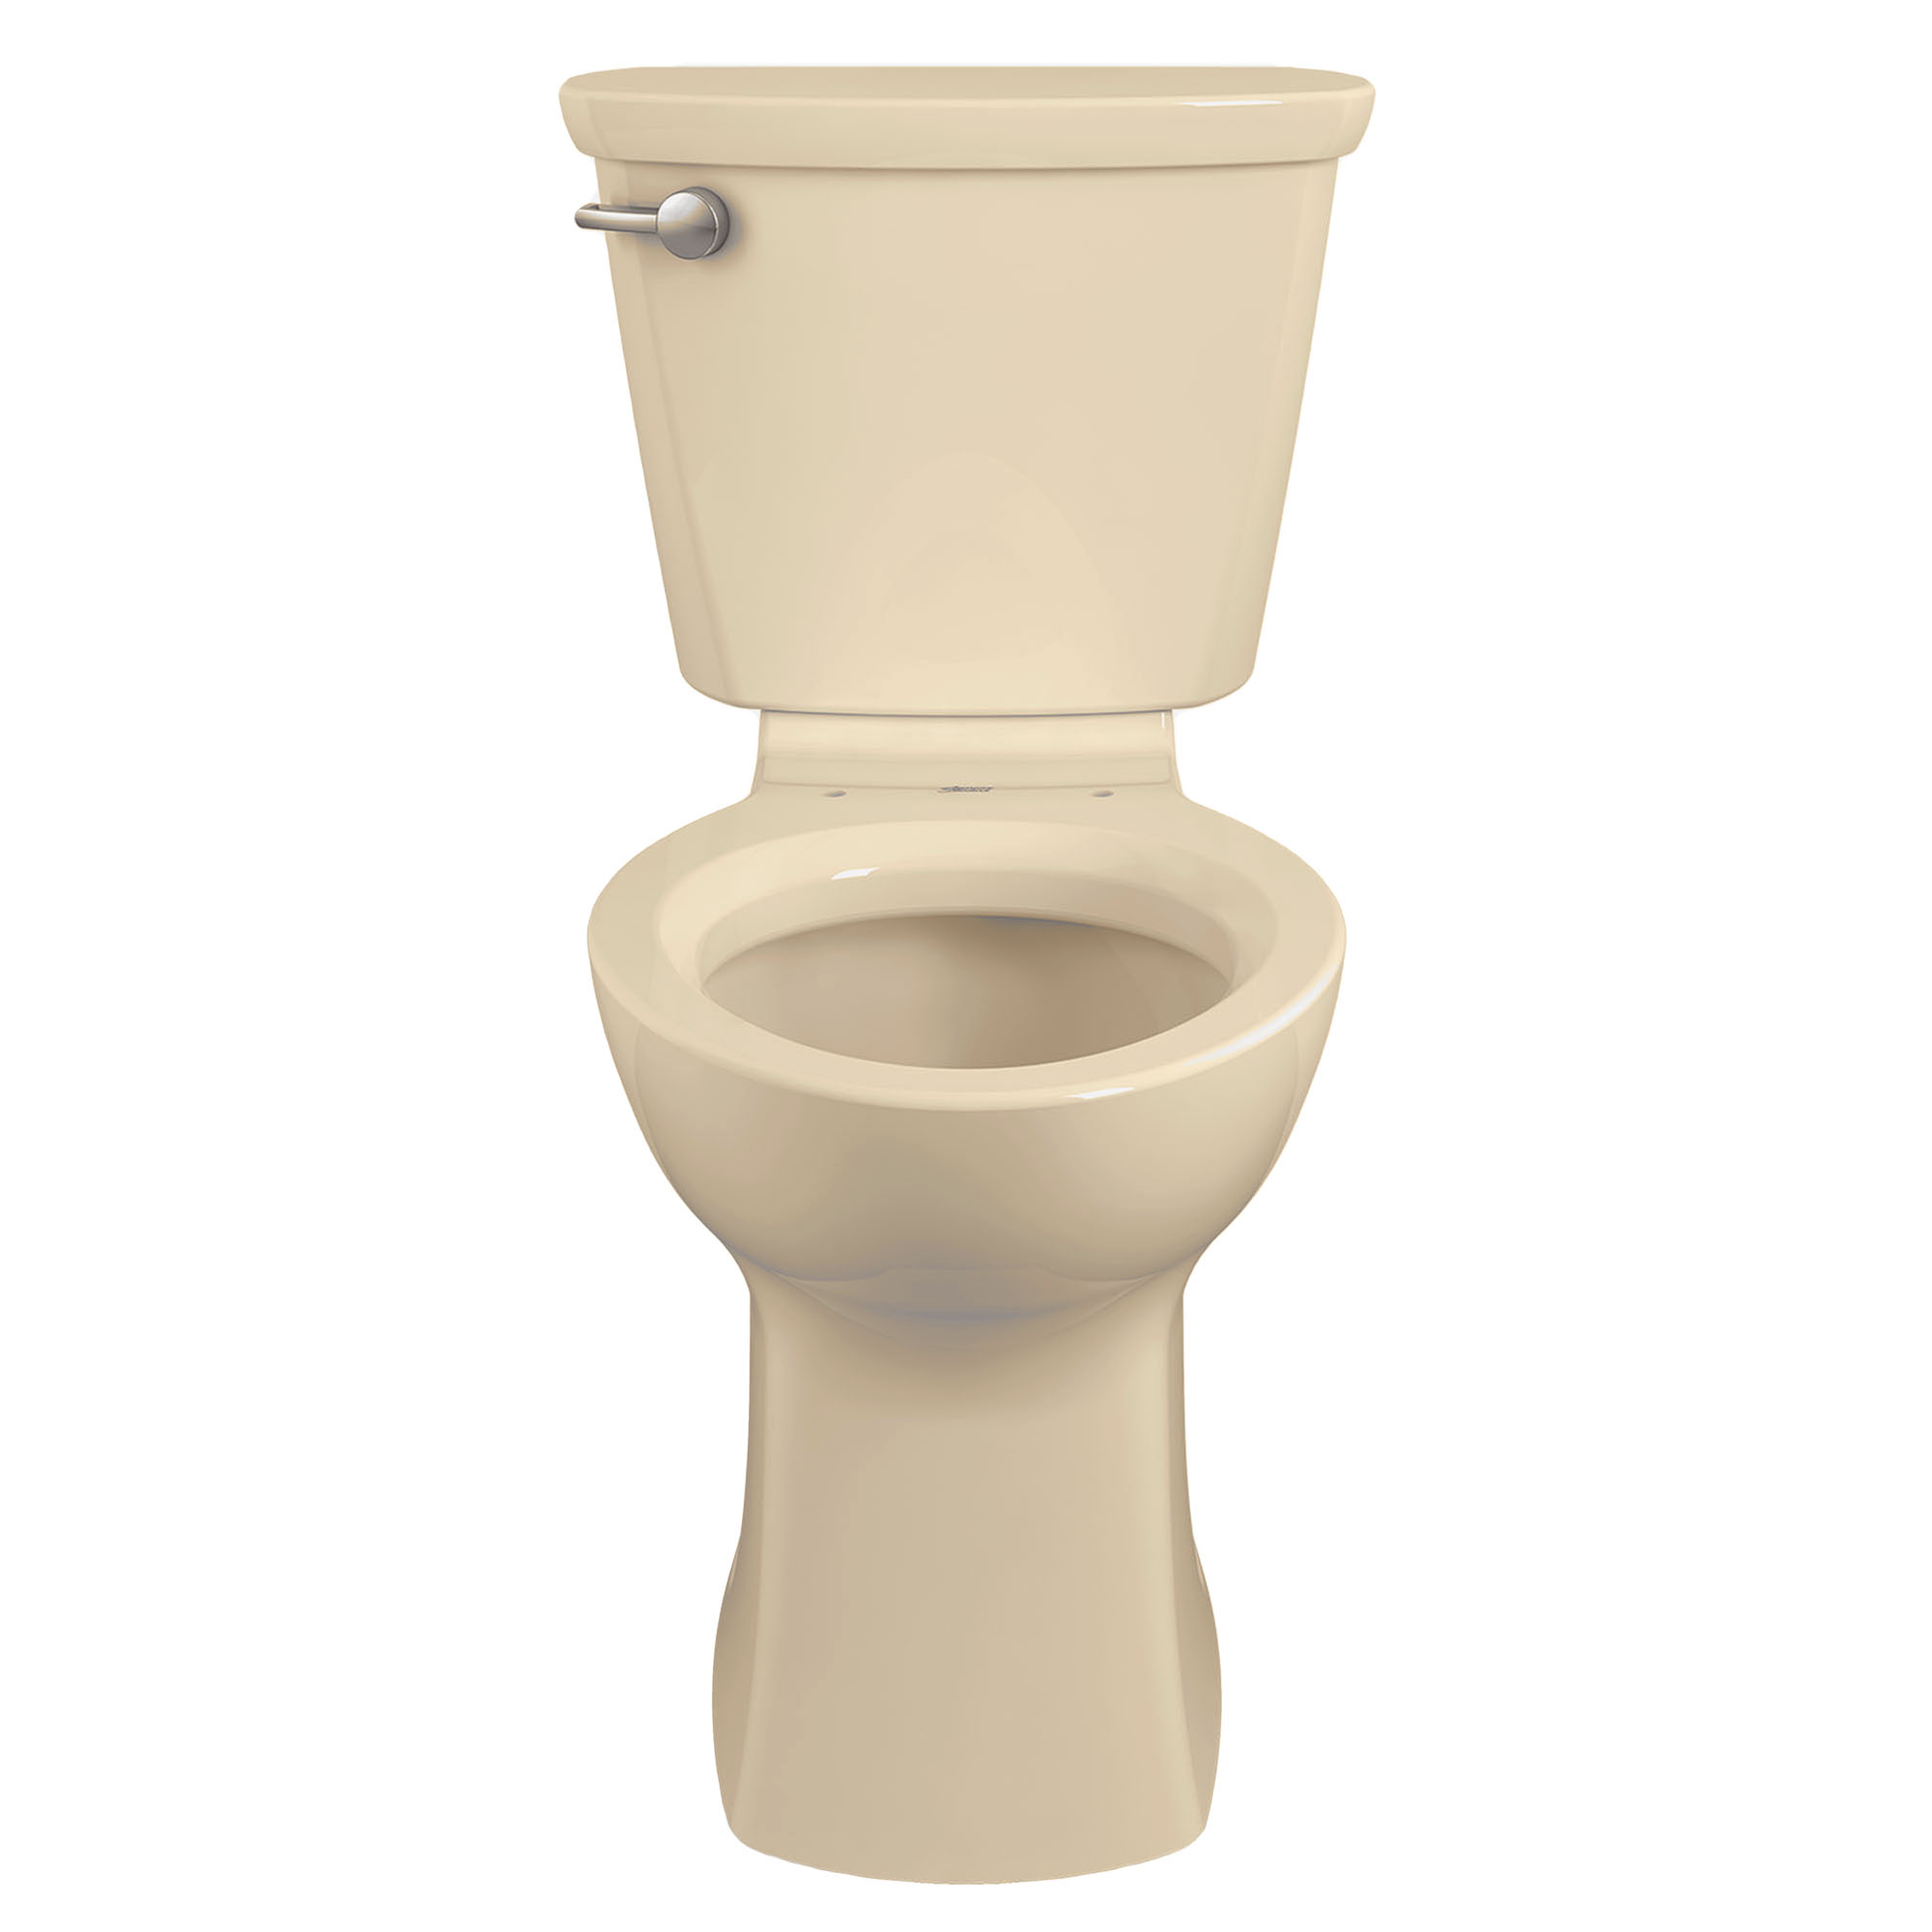 Cadet™ PRO Two-Piece 1.6 gpf/6.0 Lpf Chair Height Elongated Toilet Less Seat